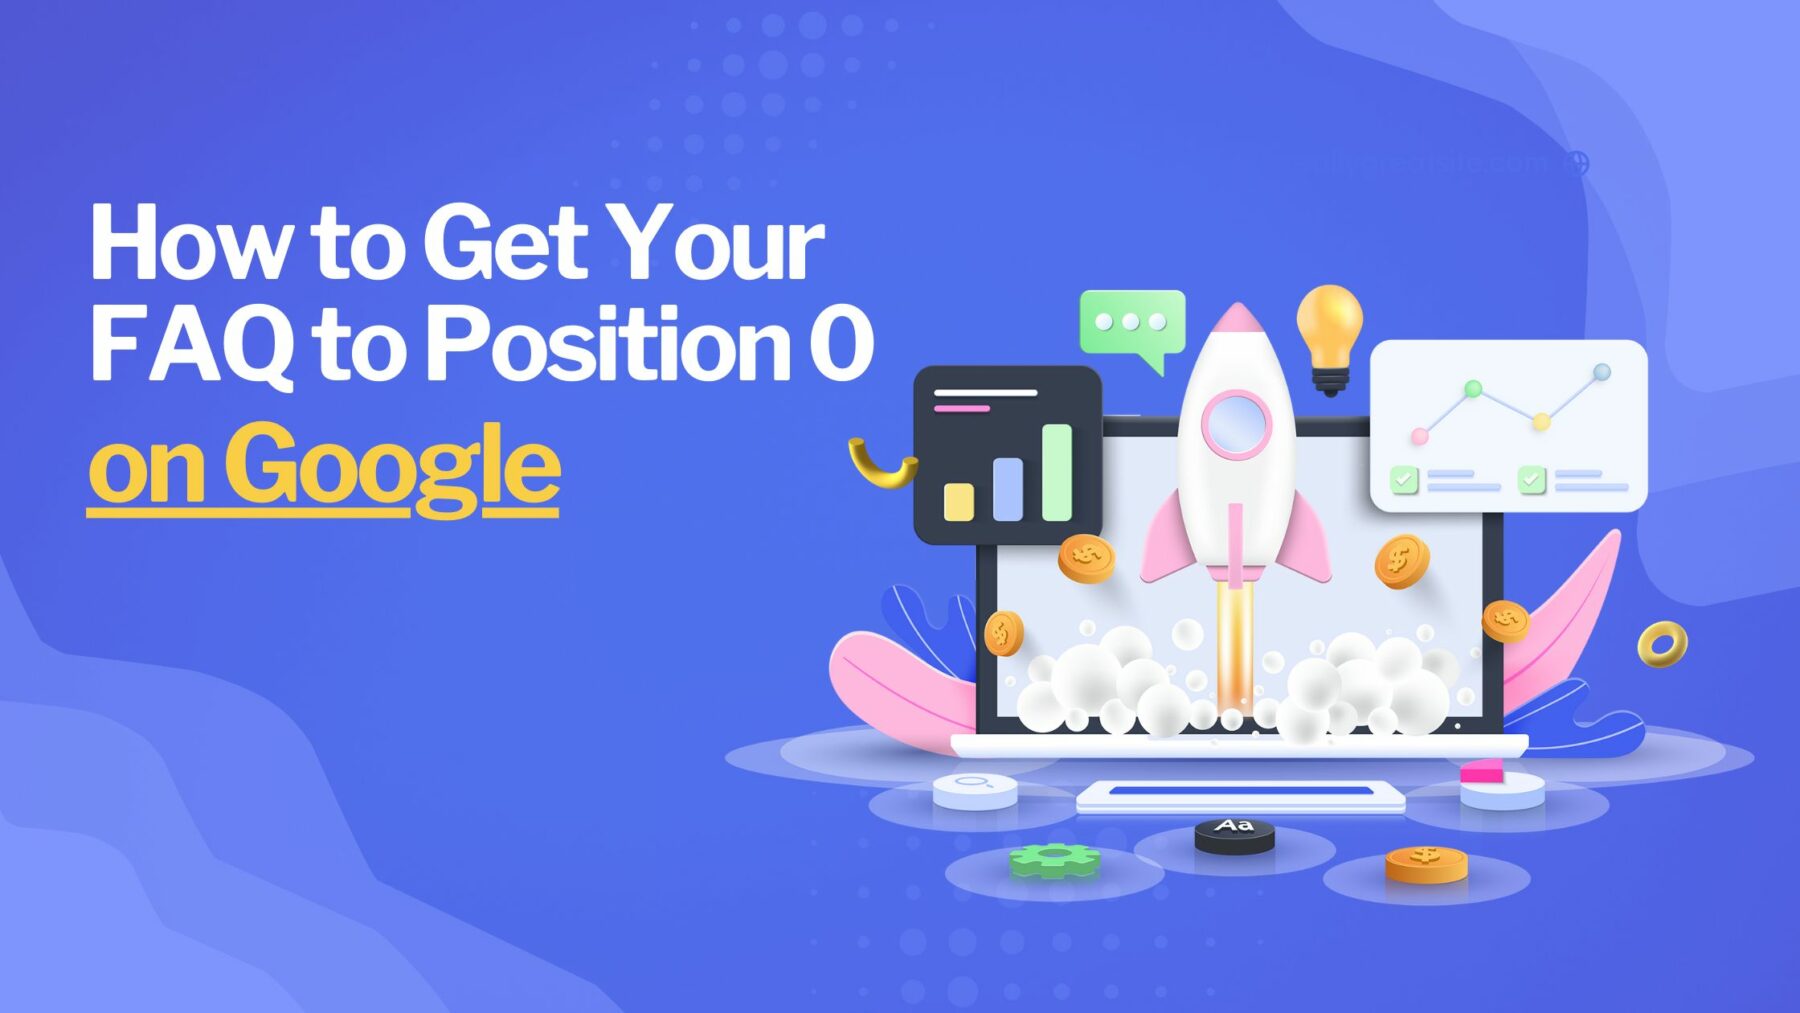 How to get your faq to position 0 on Google